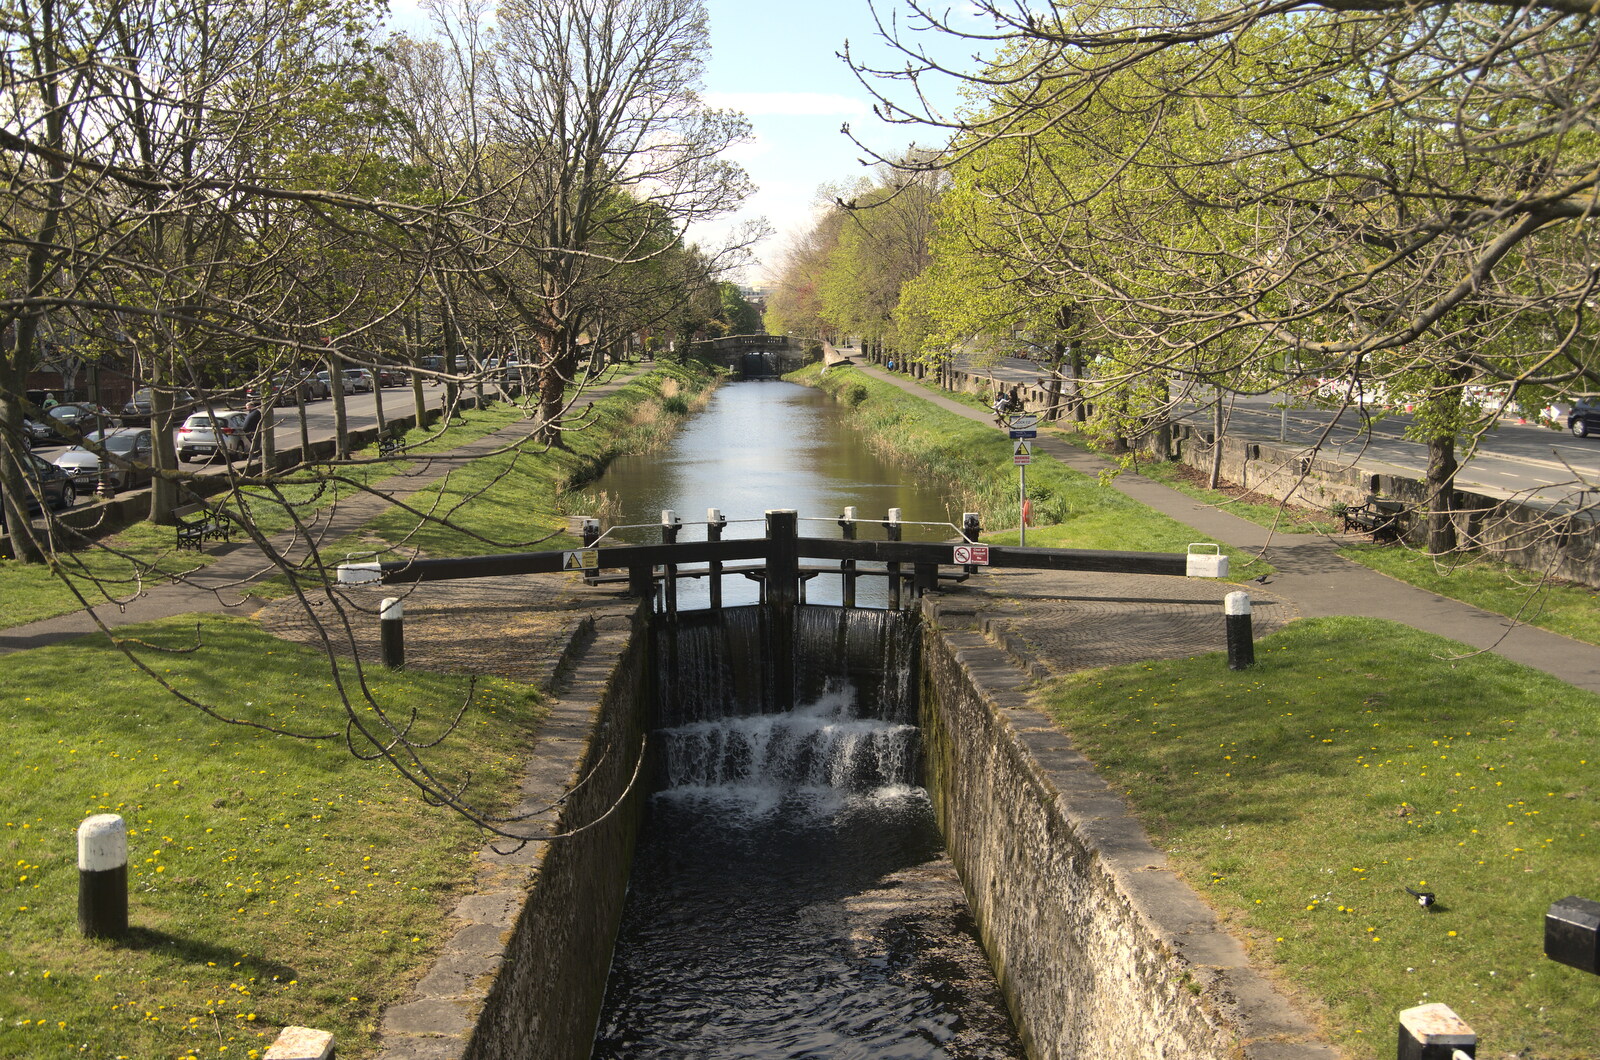 Blackrock North and South, Louth and County Dublin, Ireland - 23rd April 2022: The Grand Canal in Dublin